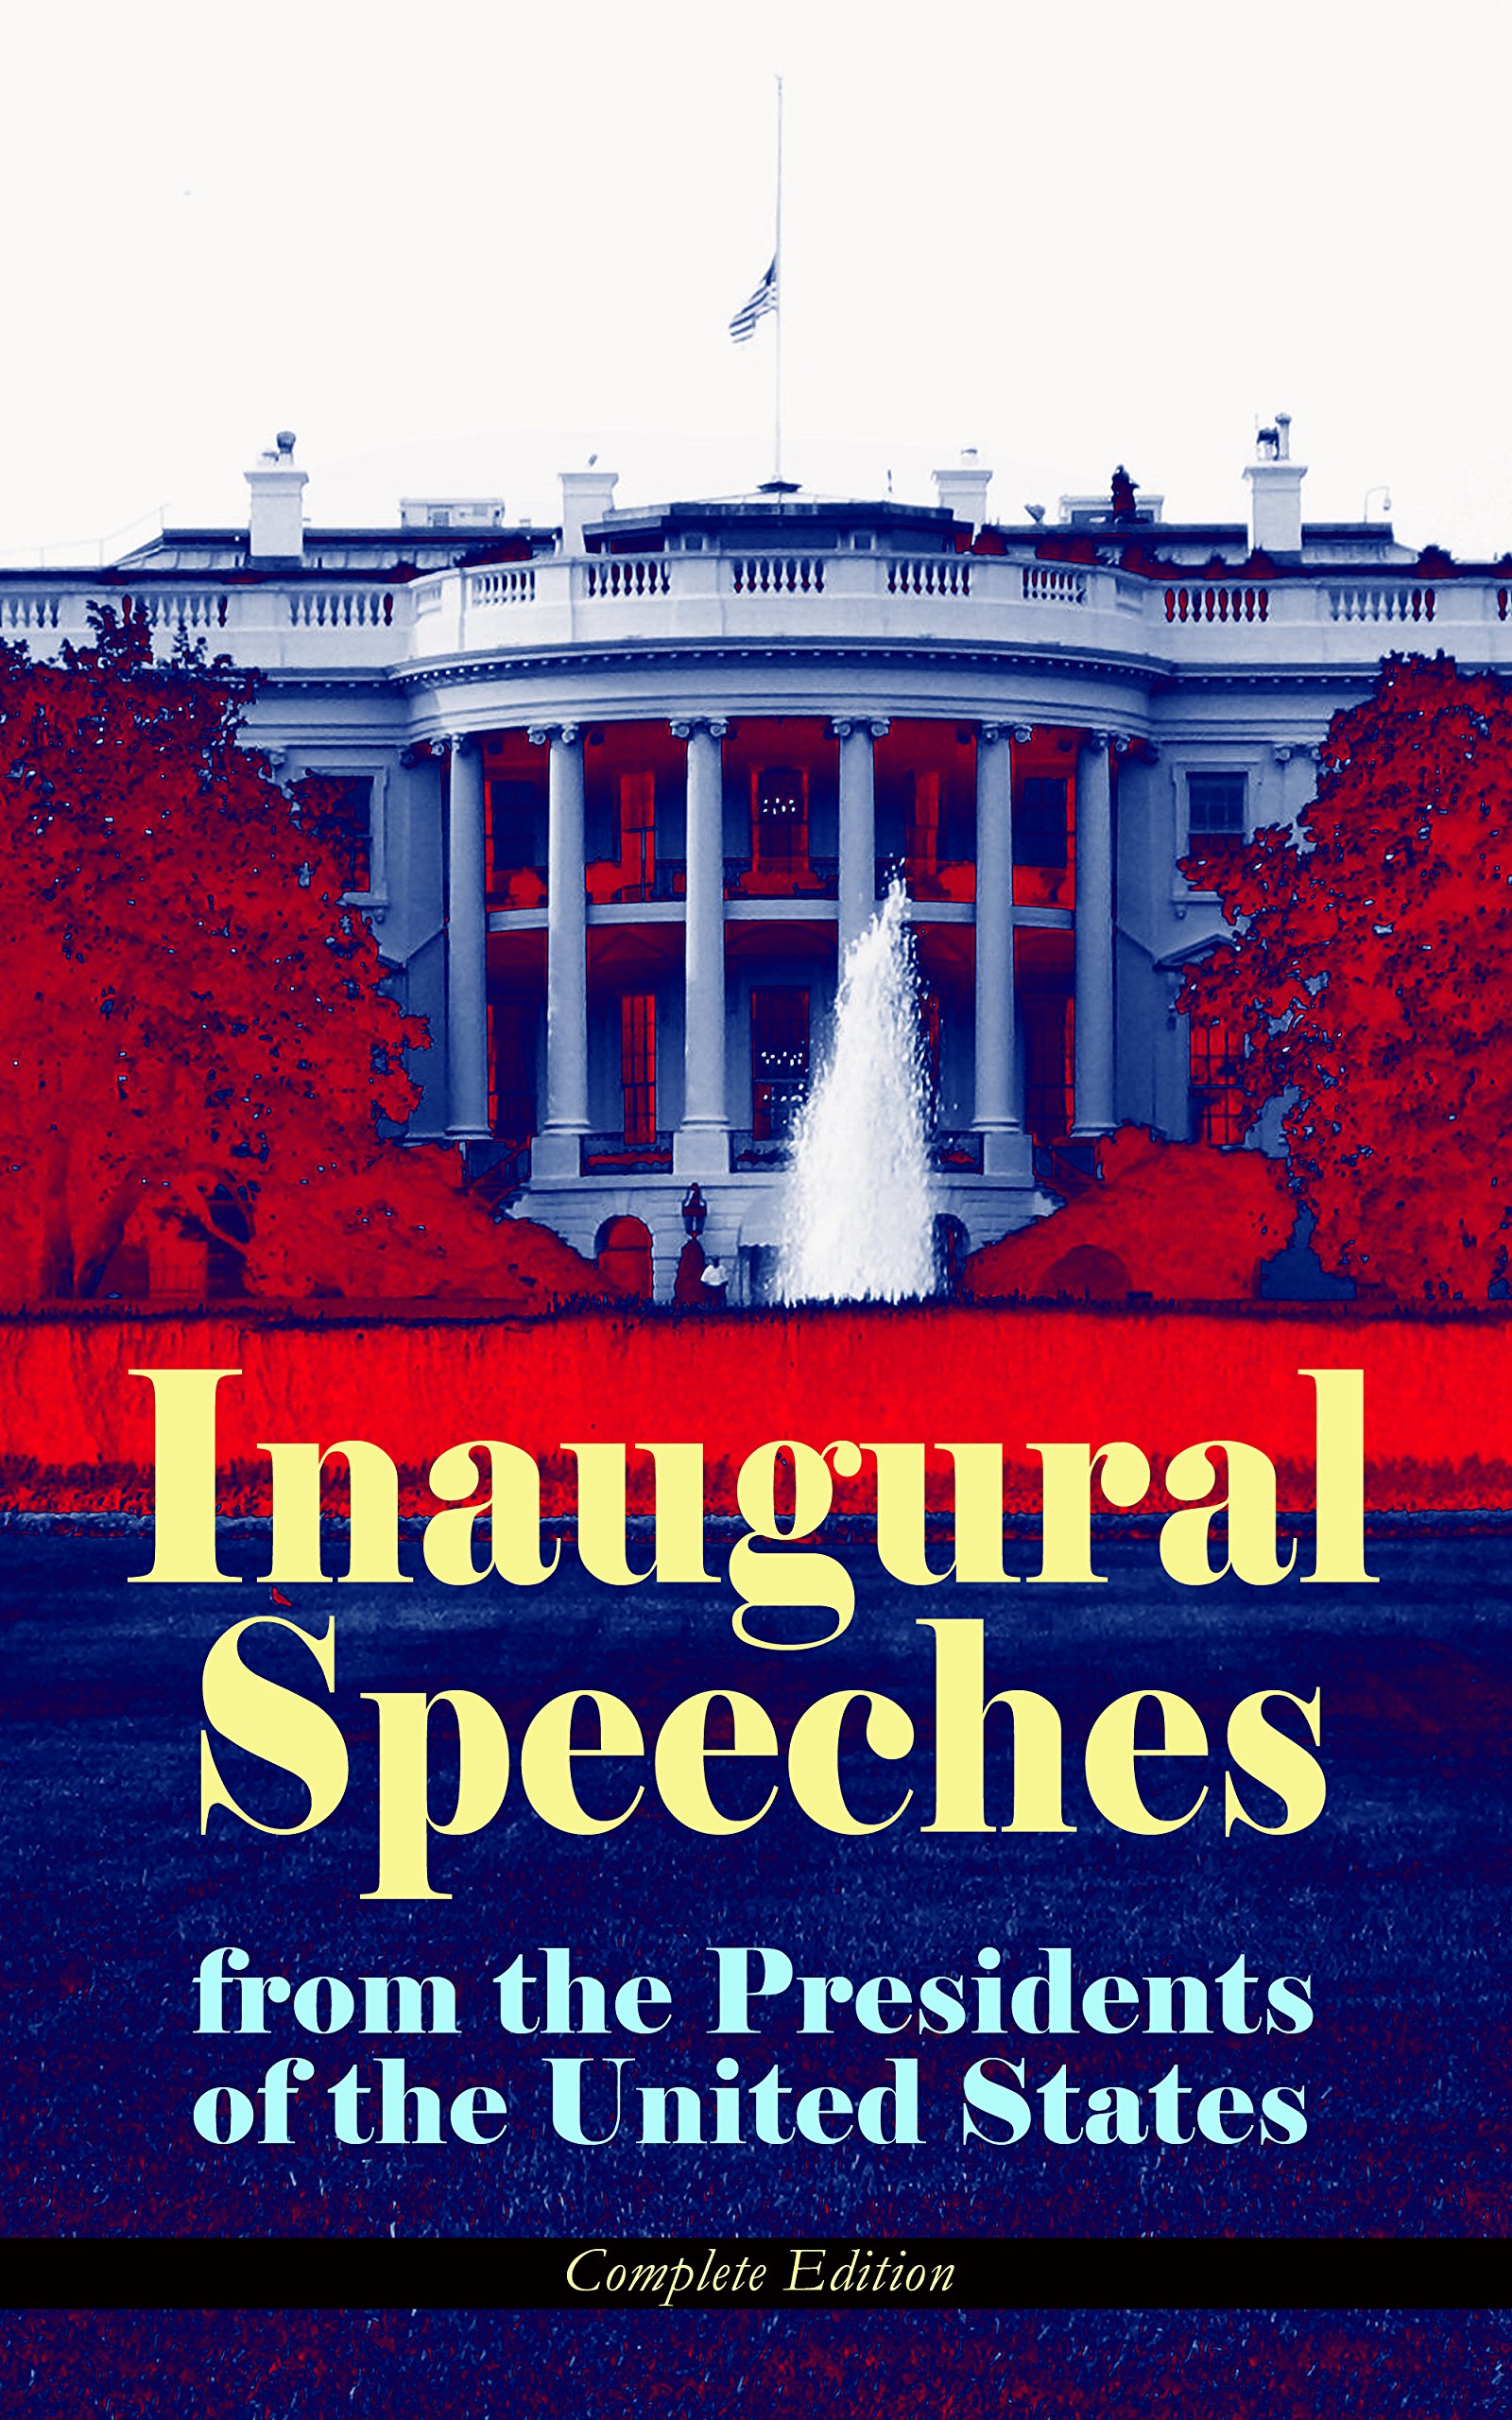 Inaugural Speeches from the Presidents of the United States - Complete Edition: From Washington to Trump (1789-2017) – See the Rise and Development of ... and Platforms of Elected Presidents